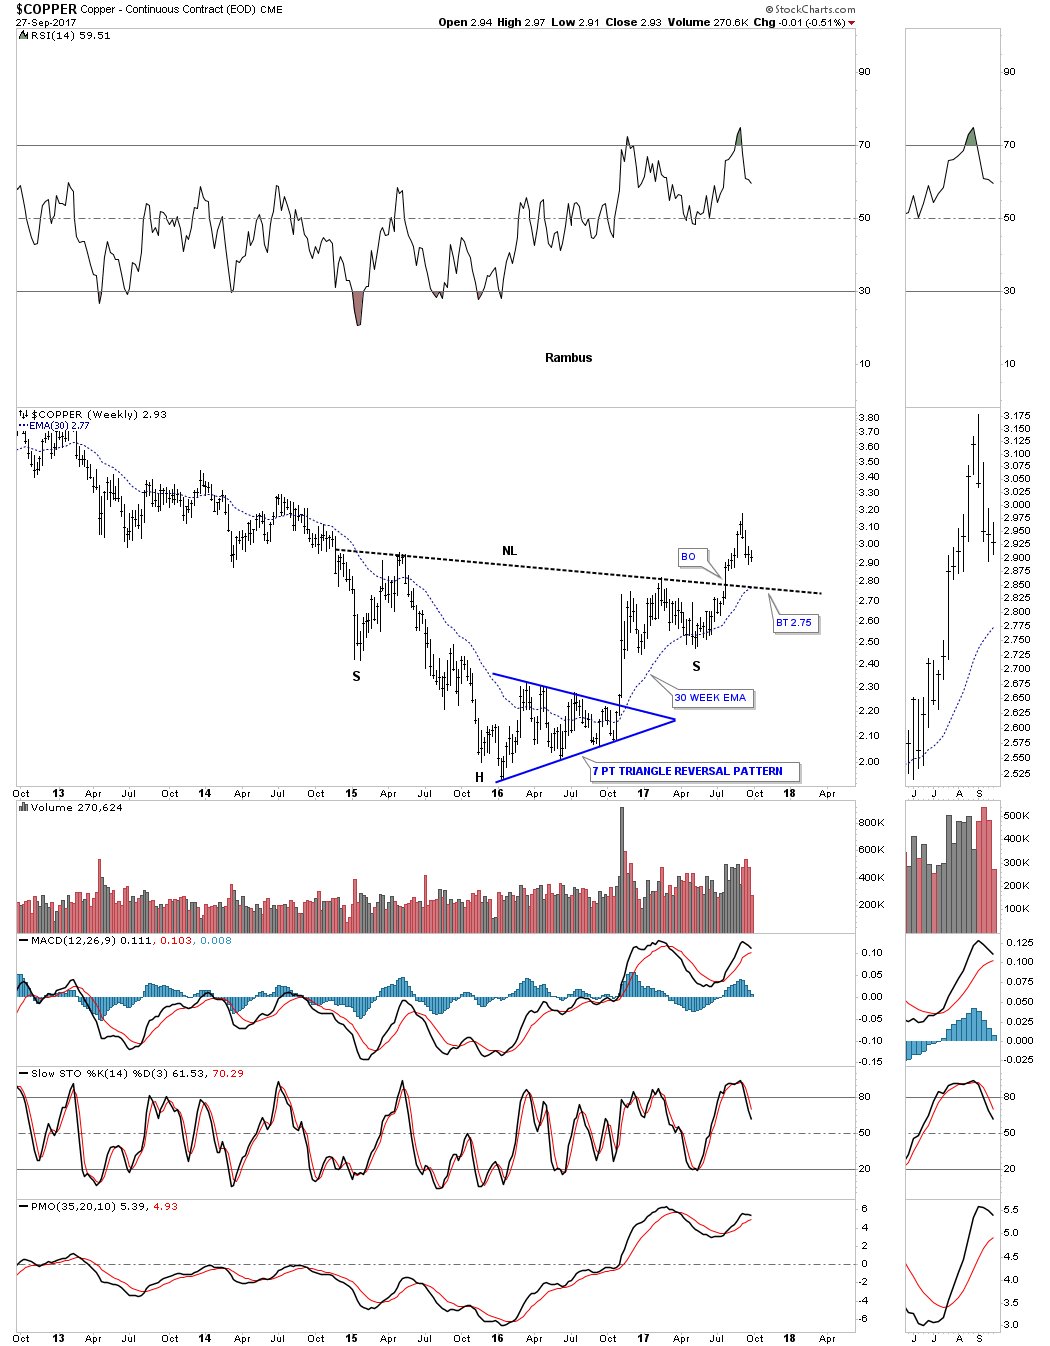 Copper Weekly 2012-2017